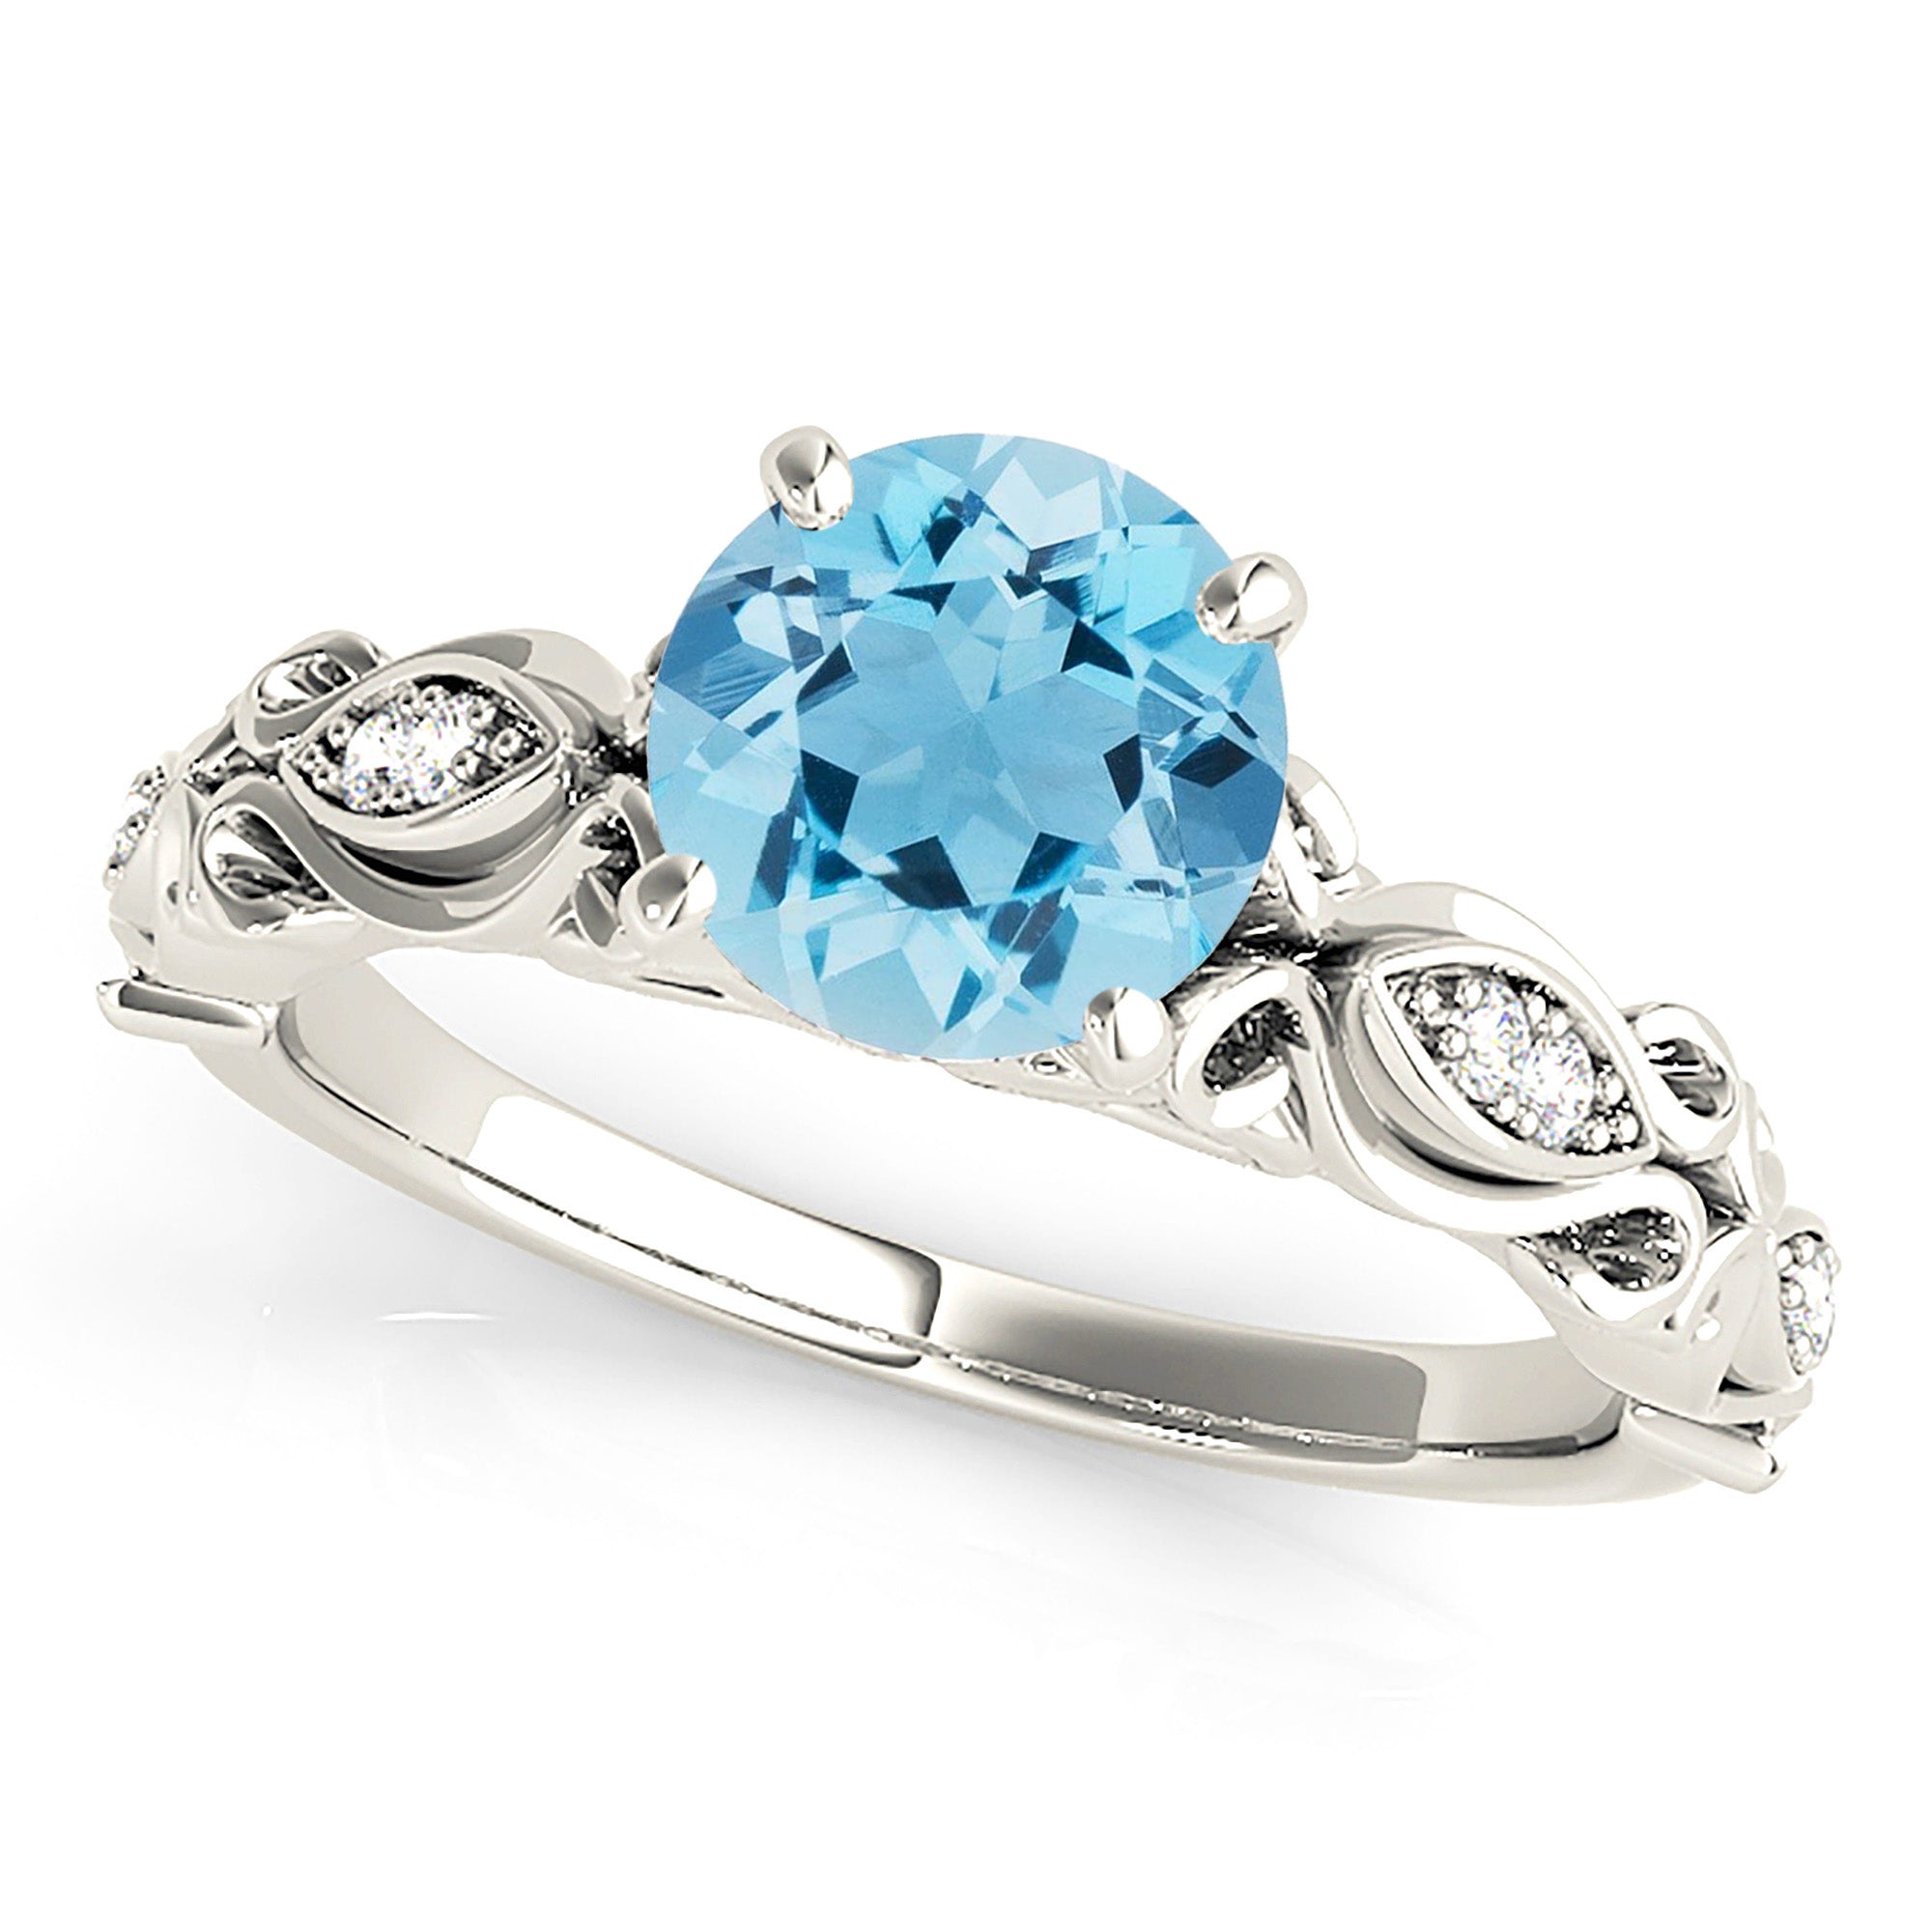 1.75 ct. Genuine Aquamarine Ring With 0.20 ctw. Diamond Fancy Hand Carved Shank, Cathedral Style Setting | Round Blue Aquamarine Halo Ring-in 14K/18K White, Yellow, Rose Gold and Platinum - Christmas Jewelry Gift -VIRABYANI